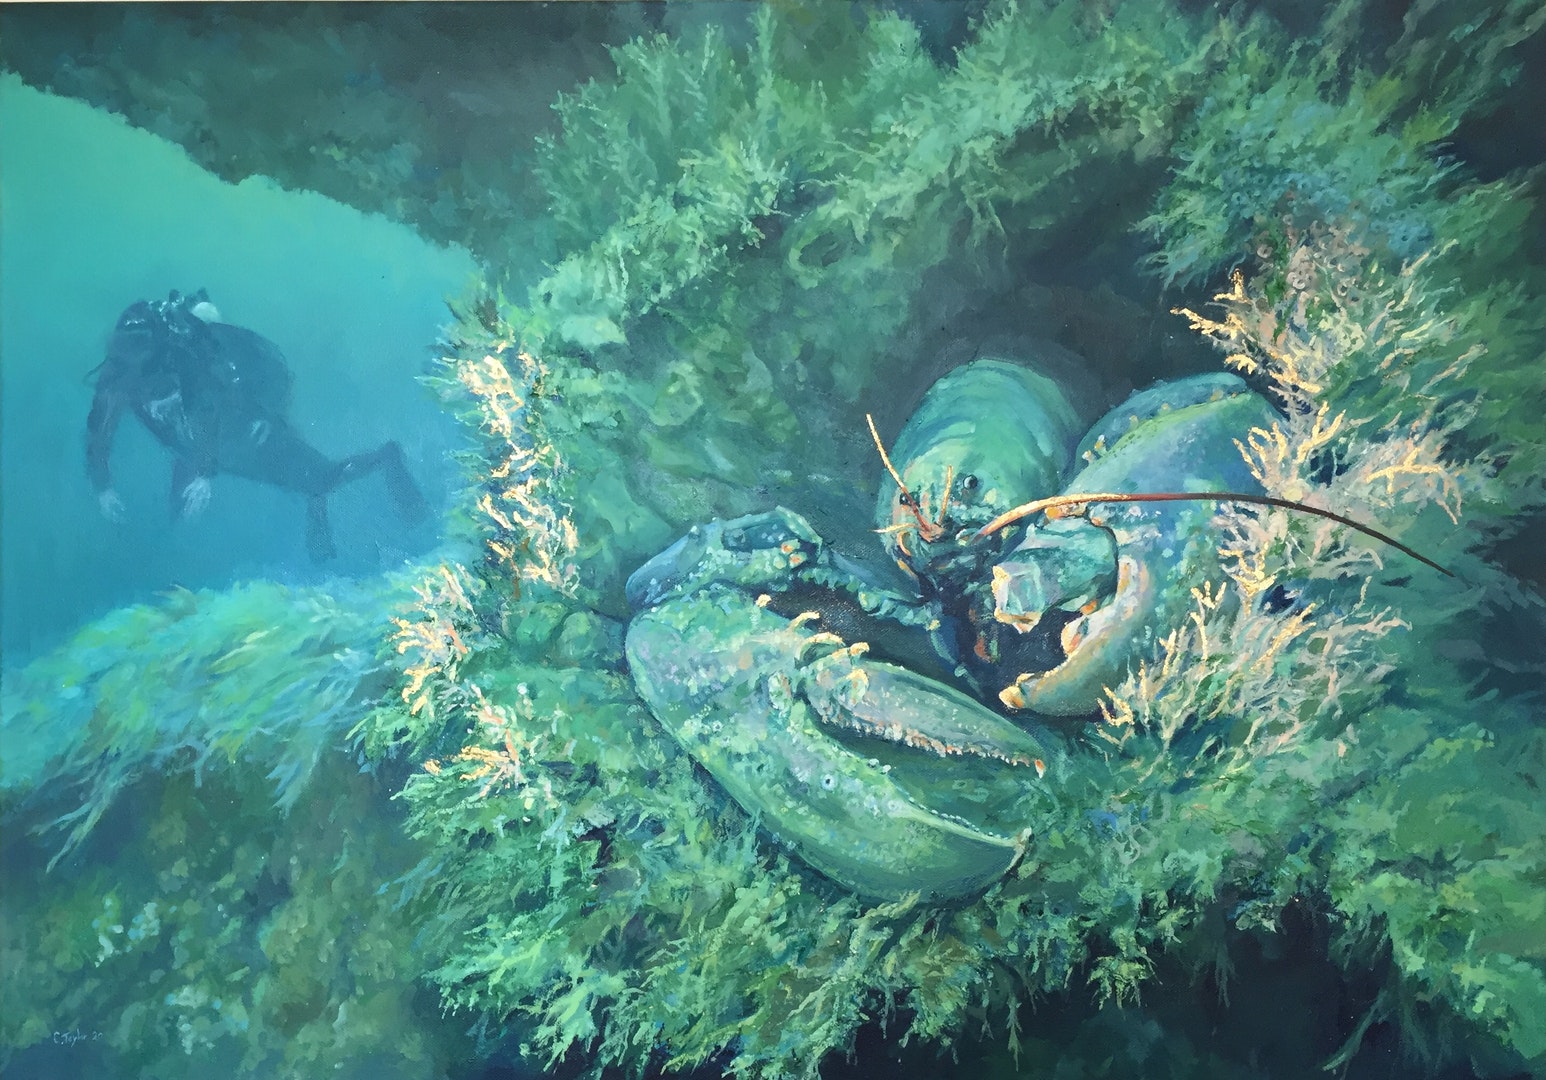 'Wreck Dwellers', Cathy Taylor, Oil and gold leaf on canvas, 59 x 84 cm